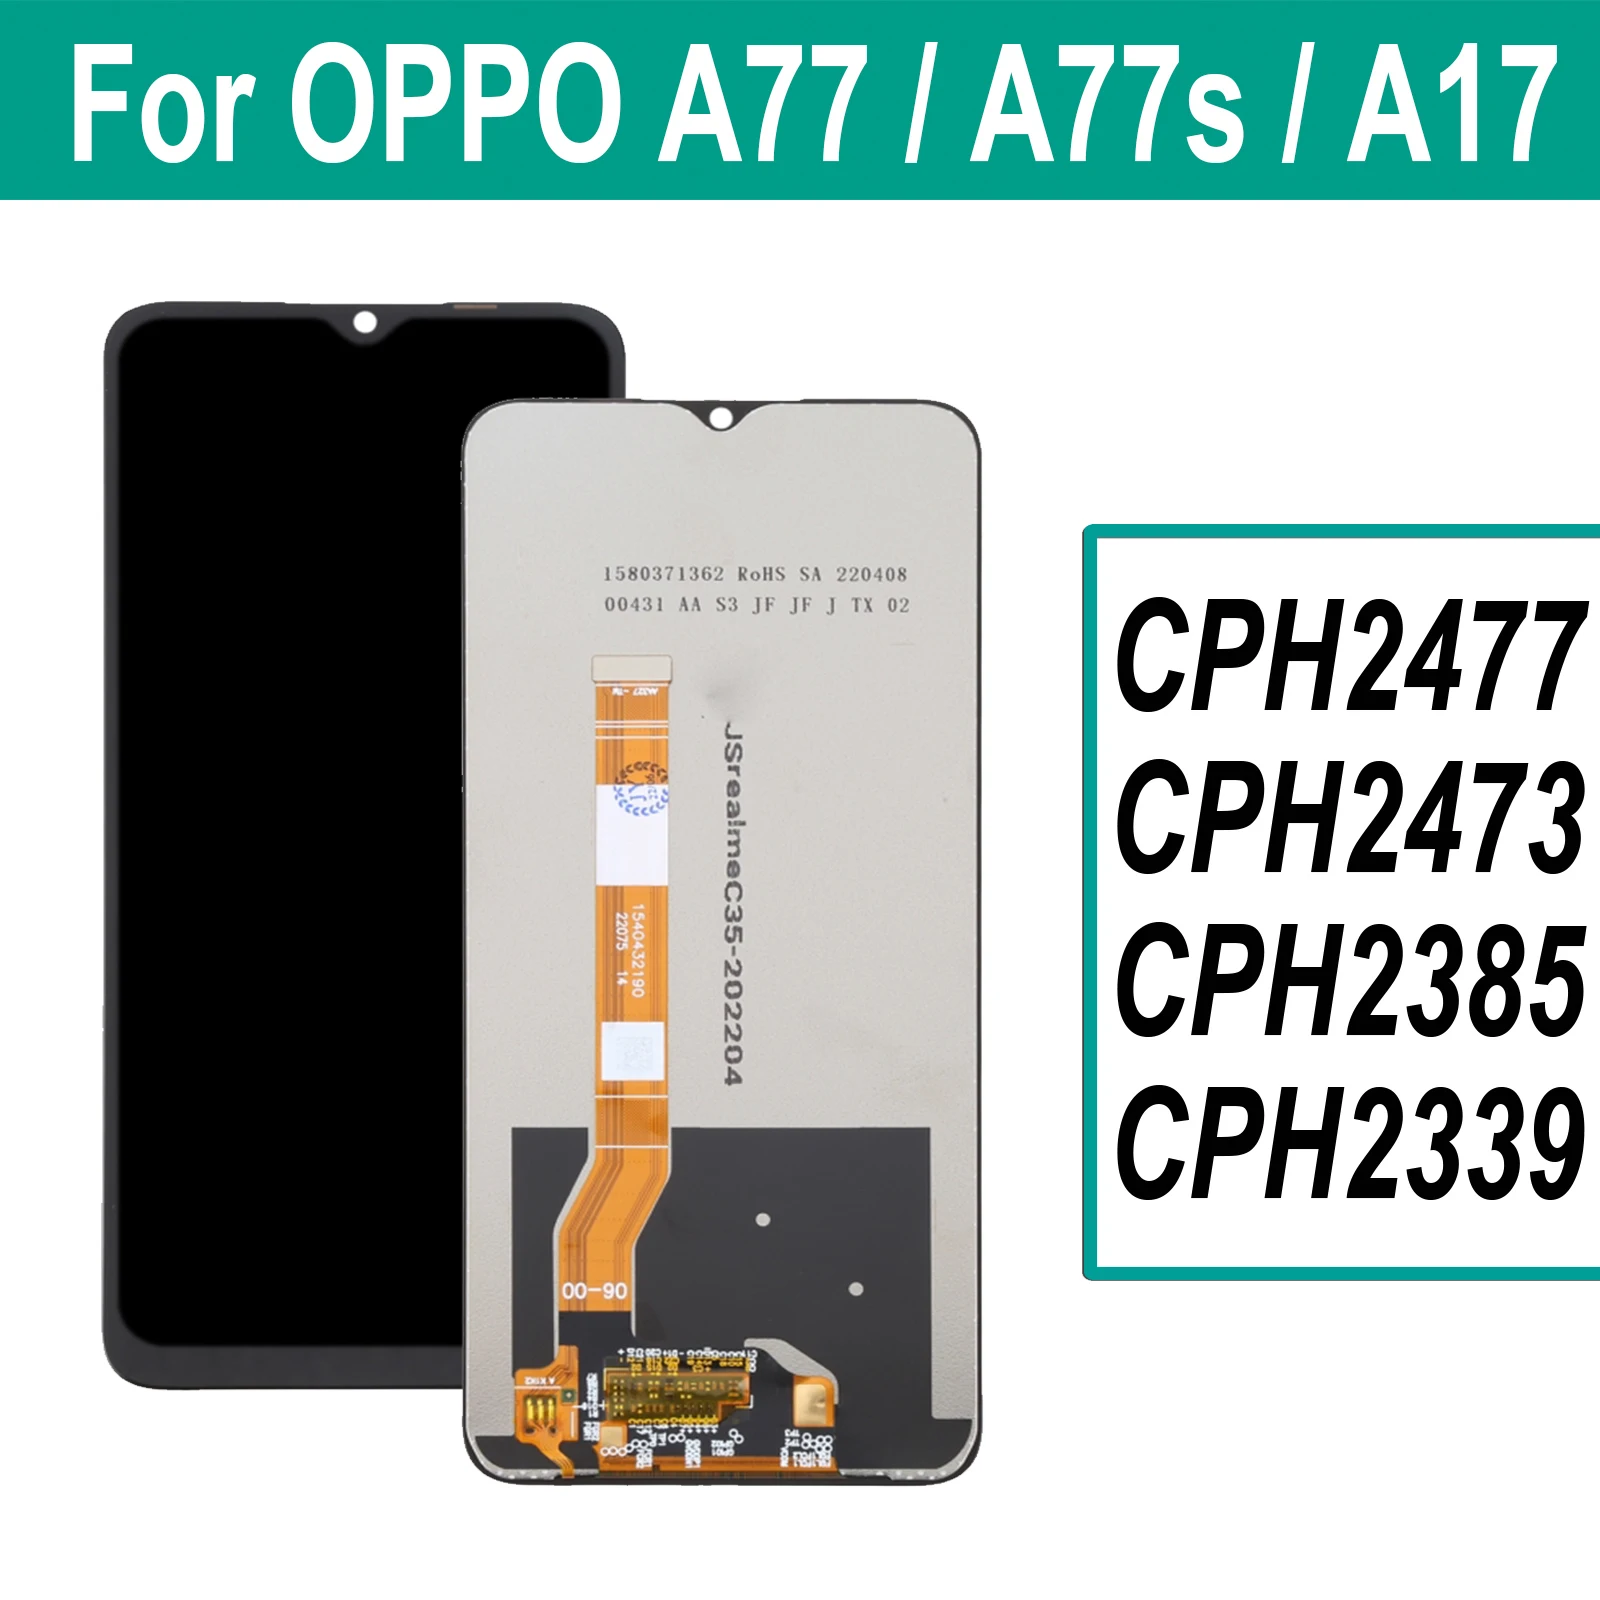 

6.56'' Original LCD Display Touch Screen Digiziter Assembly For OPPO A77 4G 5G A77s A17 CPH2385 CPH2339 CPH2473 CPH2477 LCD